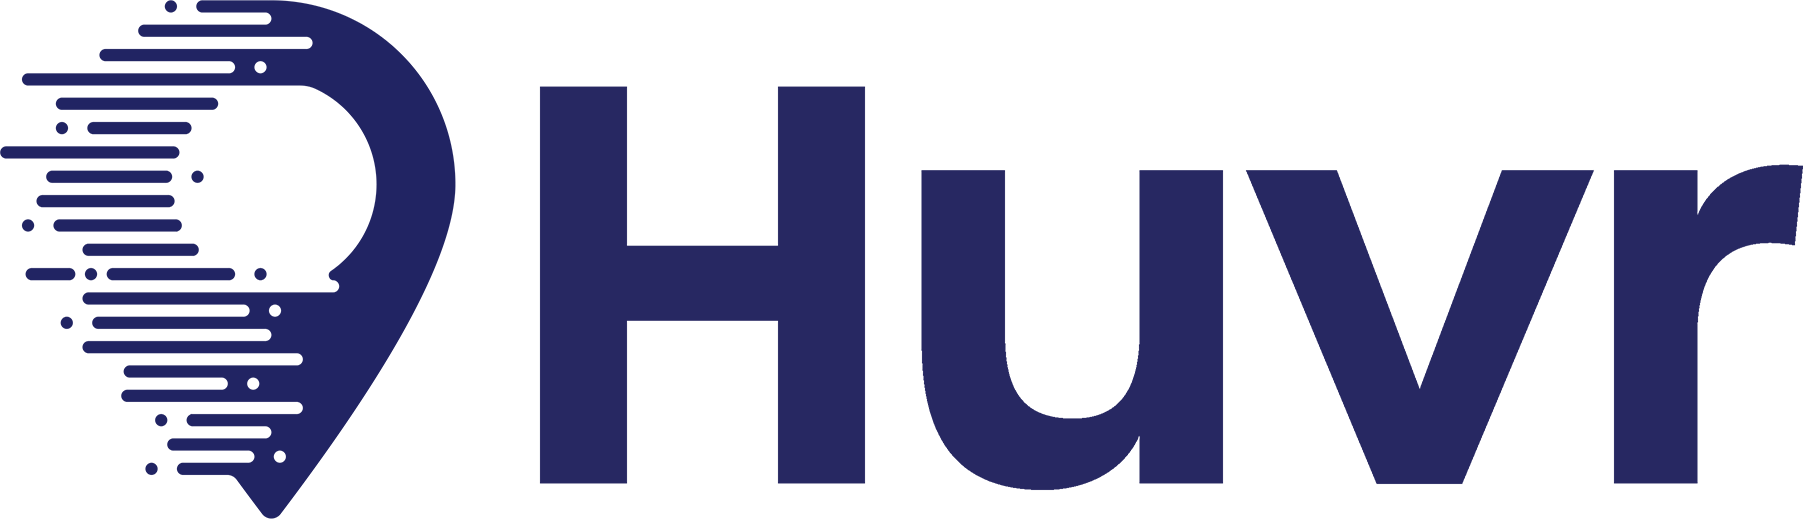 Huvr, Inc., Friday, October 7, 2022, Press release picture